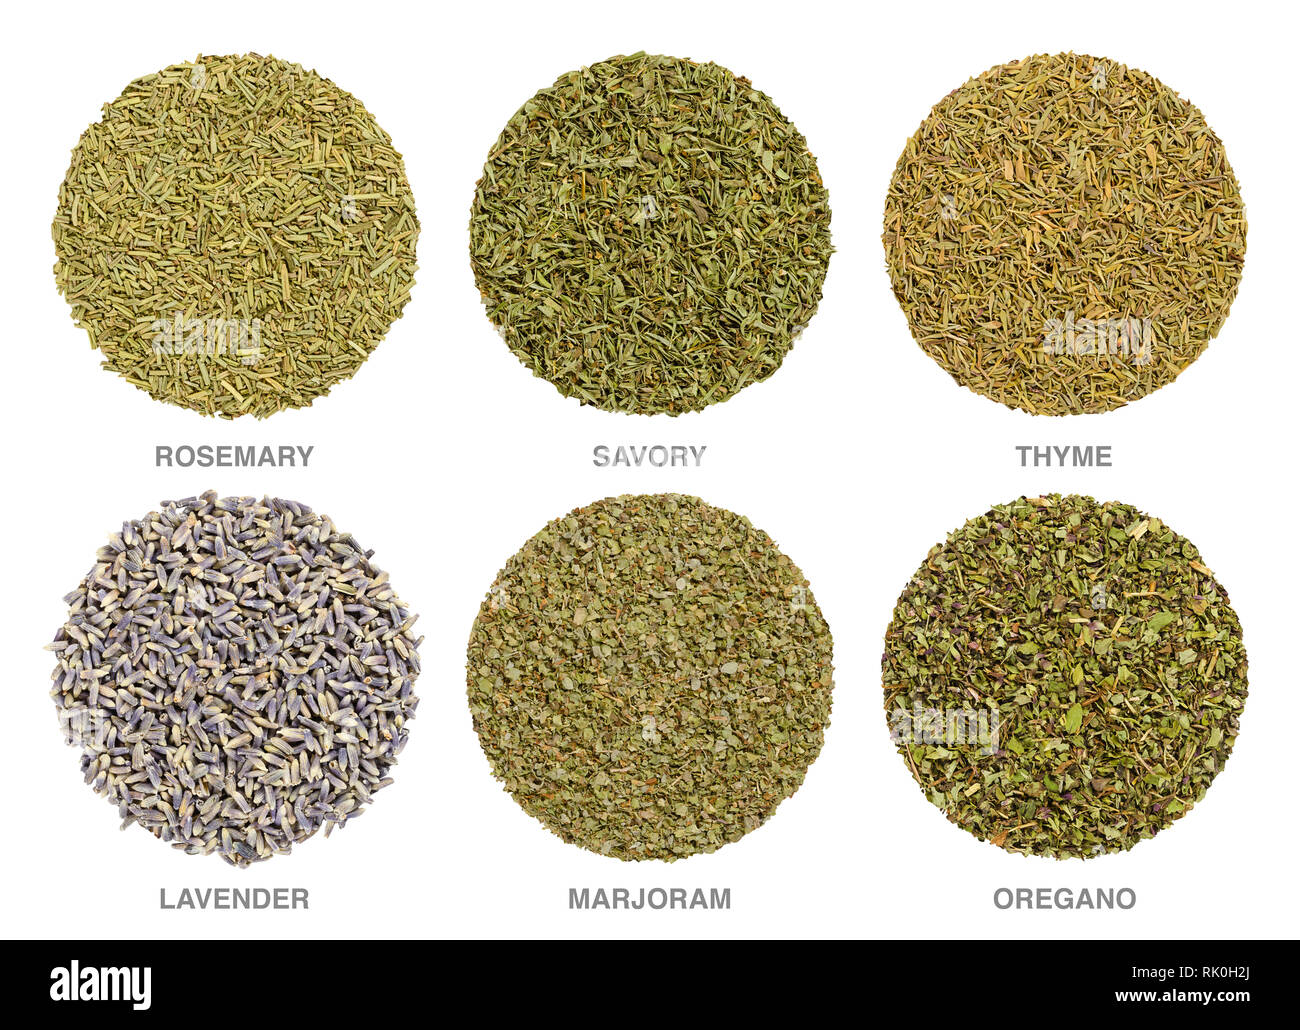 Culinary herbs for Herbes de Provence. Herbal circles. Dried rosemary, savory and thyme are always used, lavender, marjoram and oregano is often added Stock Photo